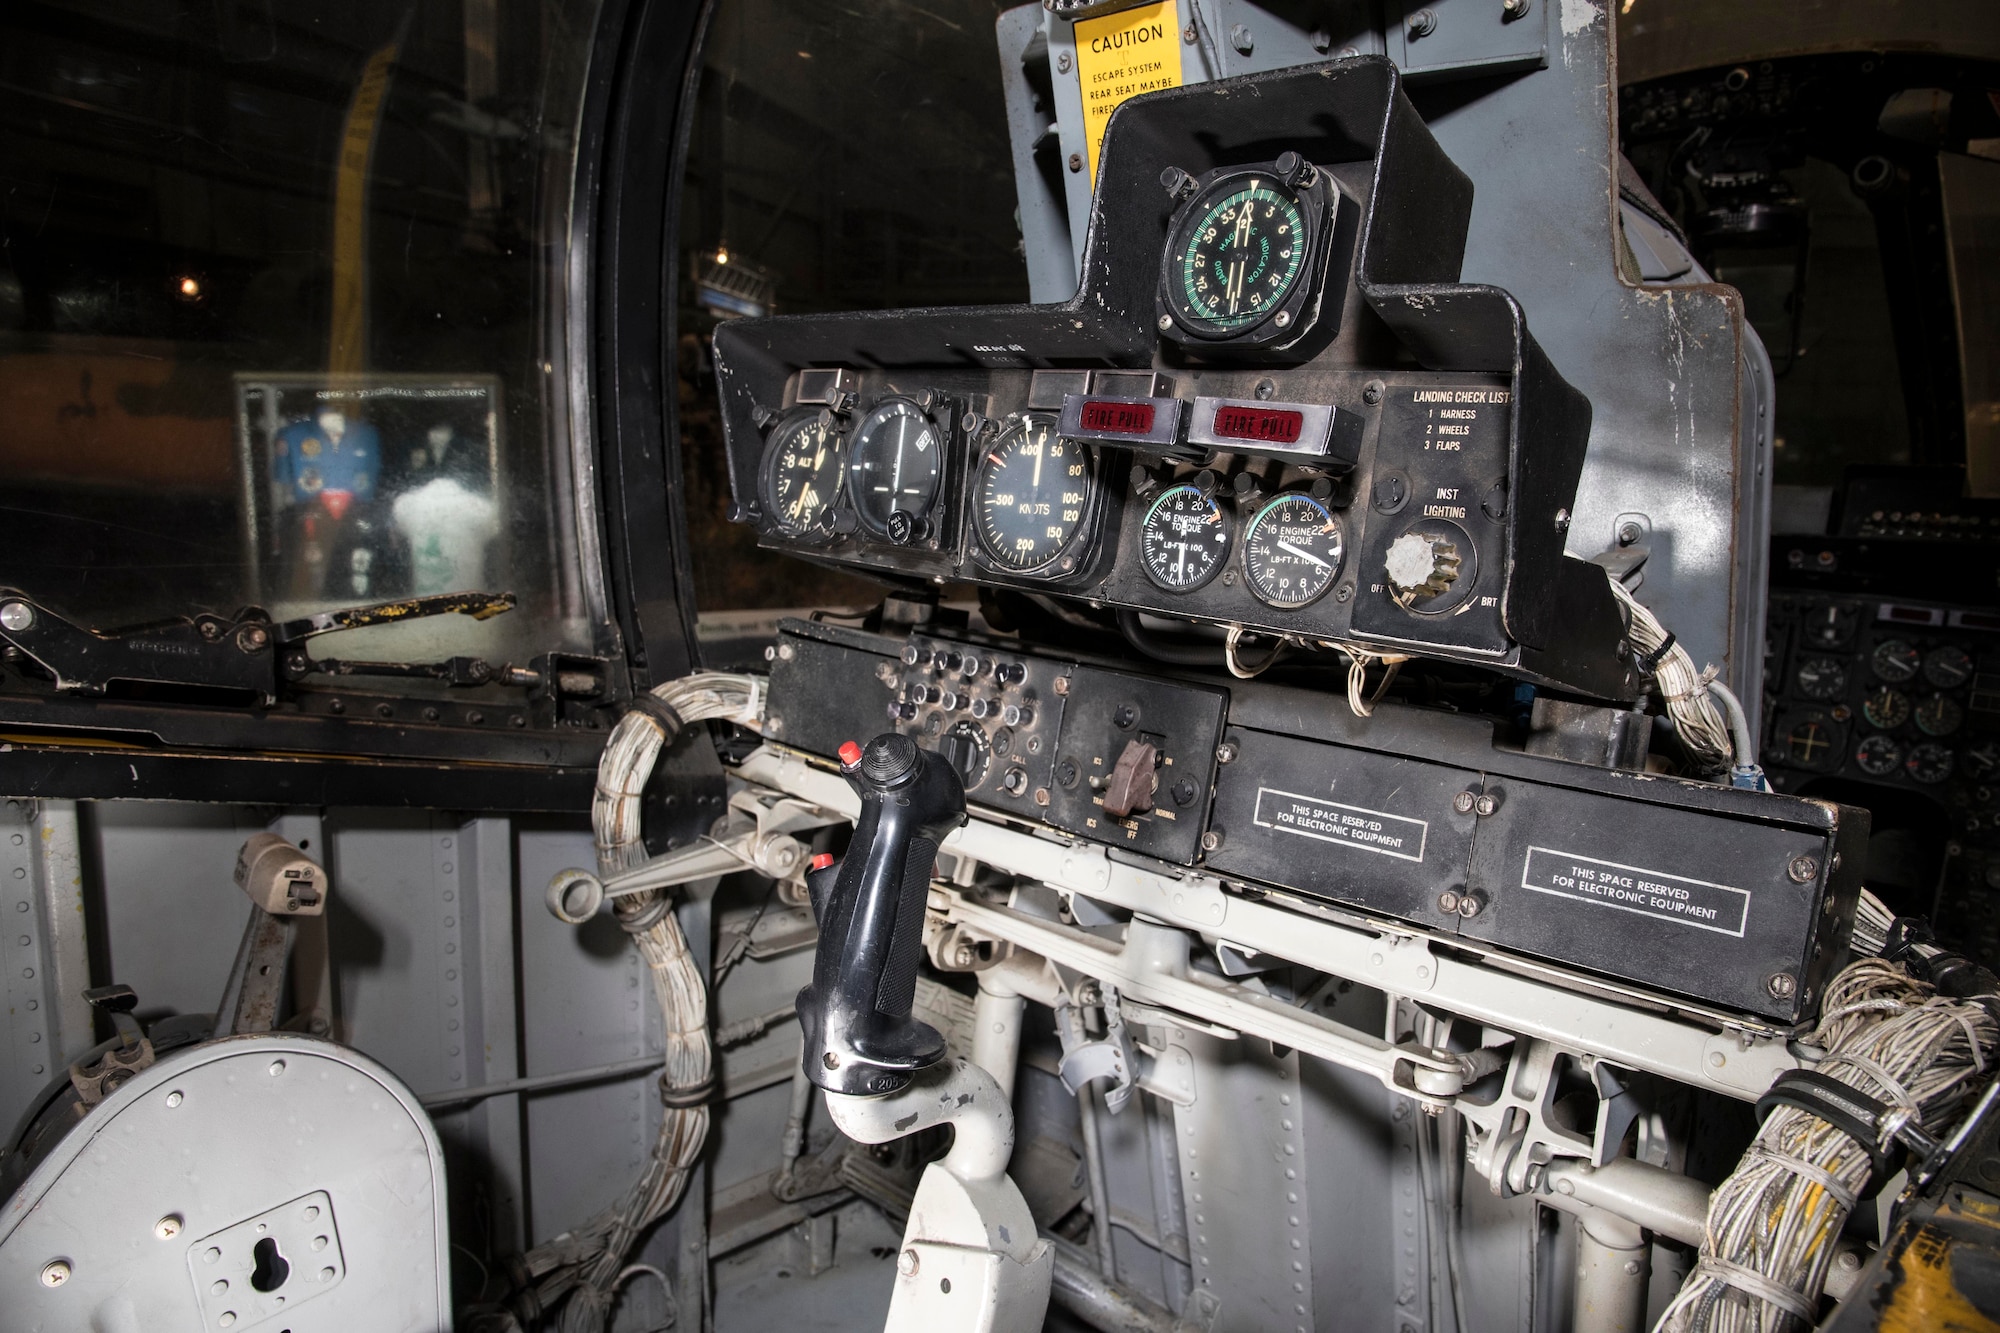 DAYTON, Ohio -- North American Rockwell OV-10A rear cockpit in the Southeast Asia War Gallery at the National Museum of the United States Air Force. (U.S. Air Force photo by Ken LaRock)